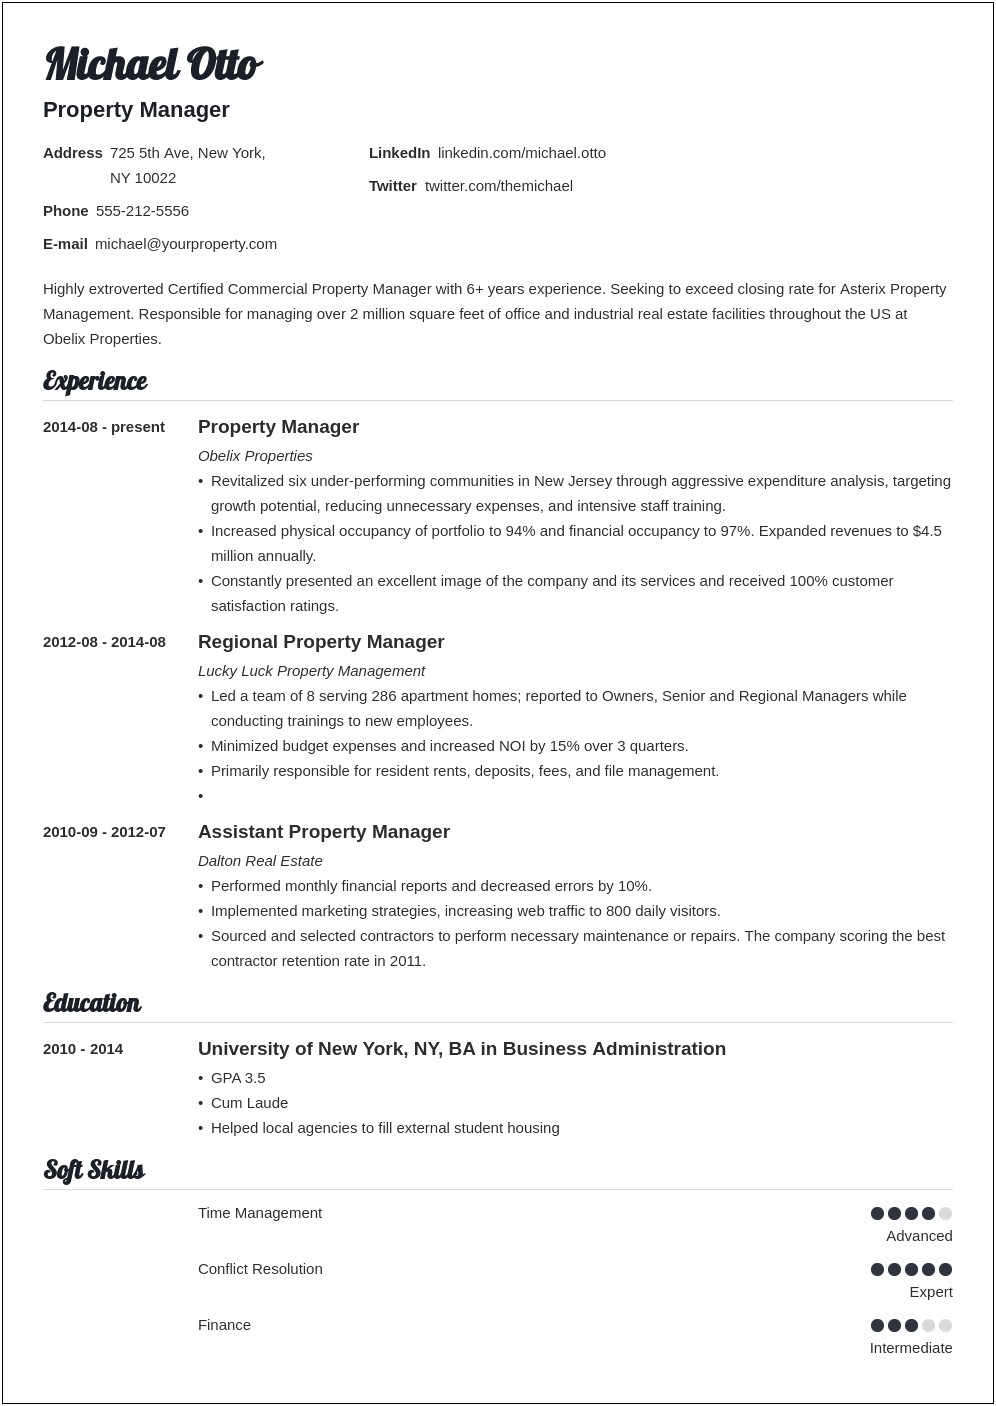 Residential Property Management Property Manager Resume